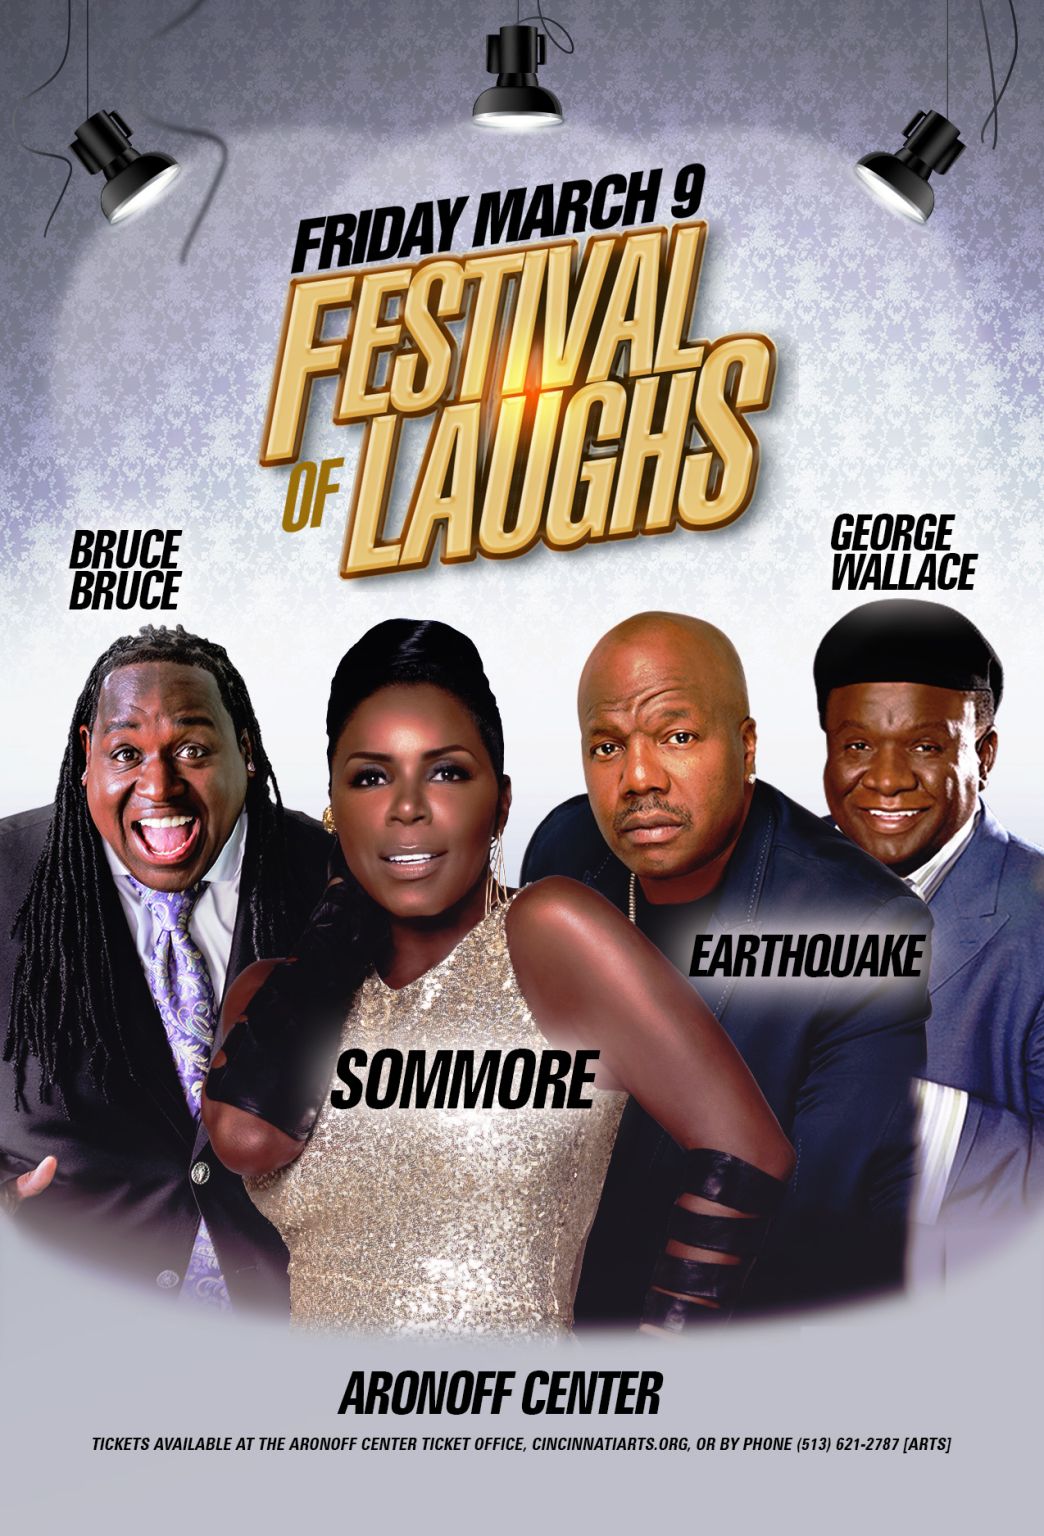 Festival of Laughs Ft. Sommore, Bruce Bruce and more 101.1 The Wiz